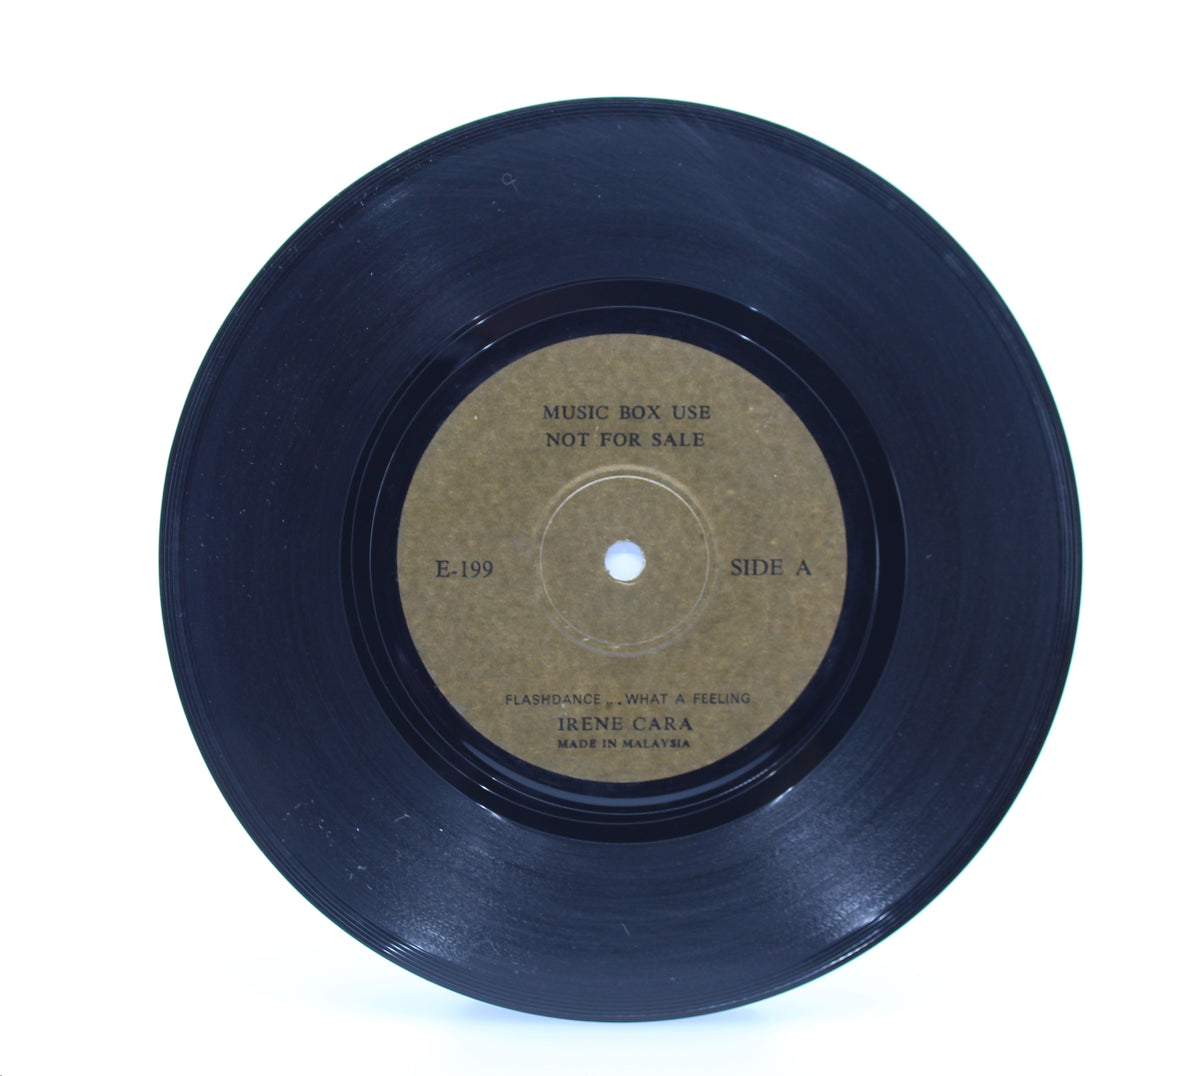 Bee Gees and Irene Cara, Music Box Use &quot;Not for sale&quot;, Vinyl 7&quot; single (45rpm), Malaysia